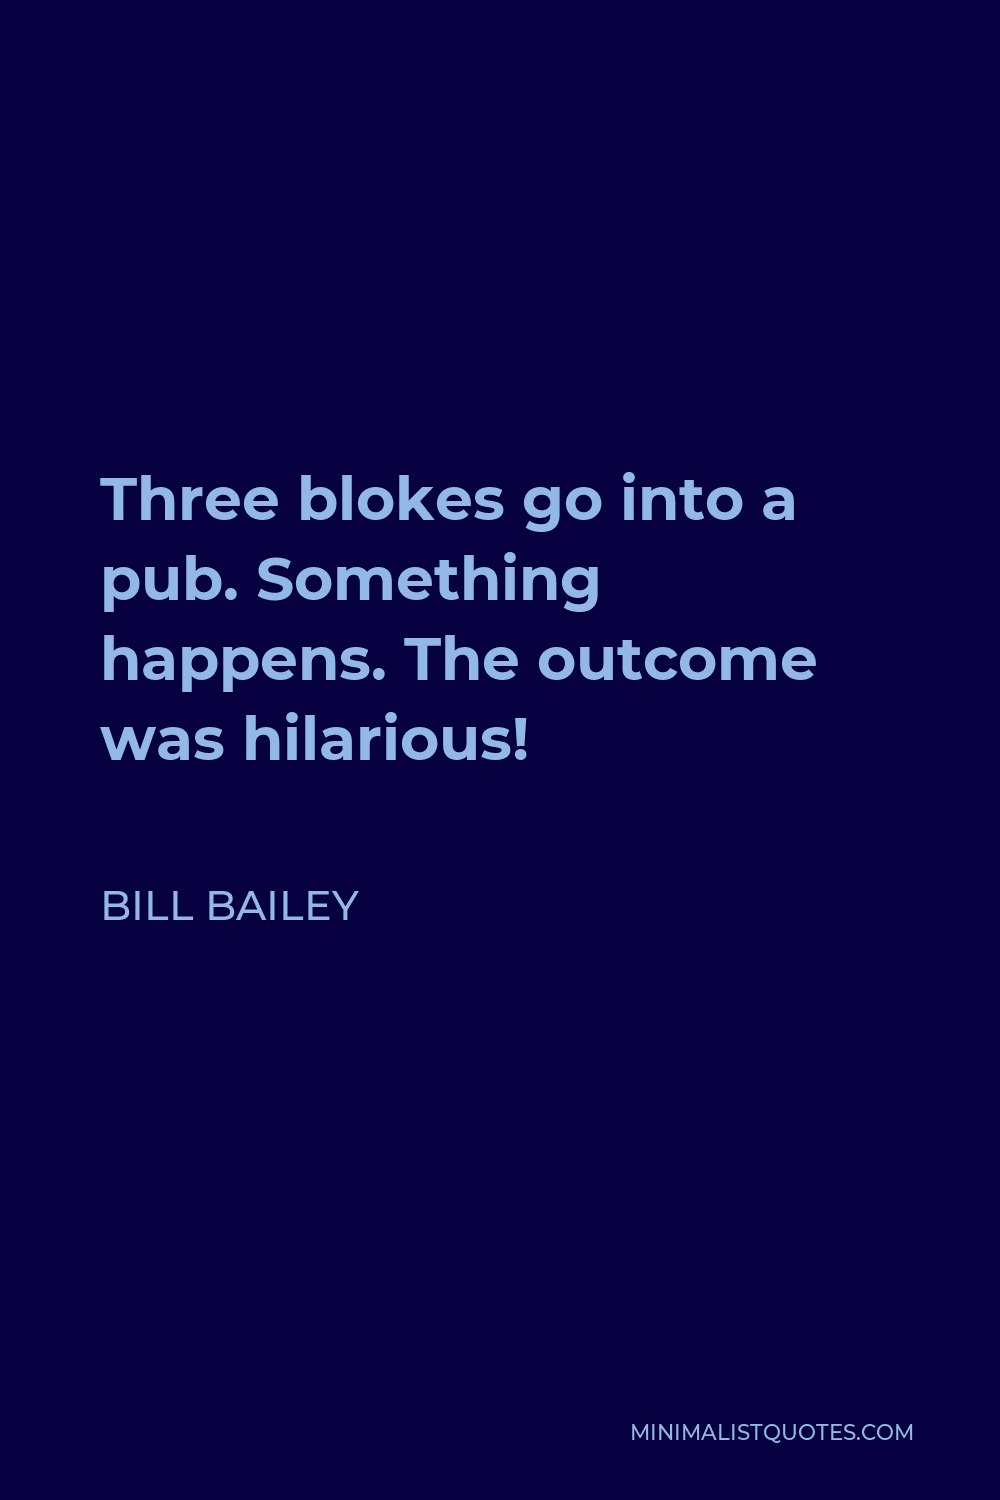 Bill Bailey Quote - Three blokes go into a pub. Something happens. The outcome was hilarious!